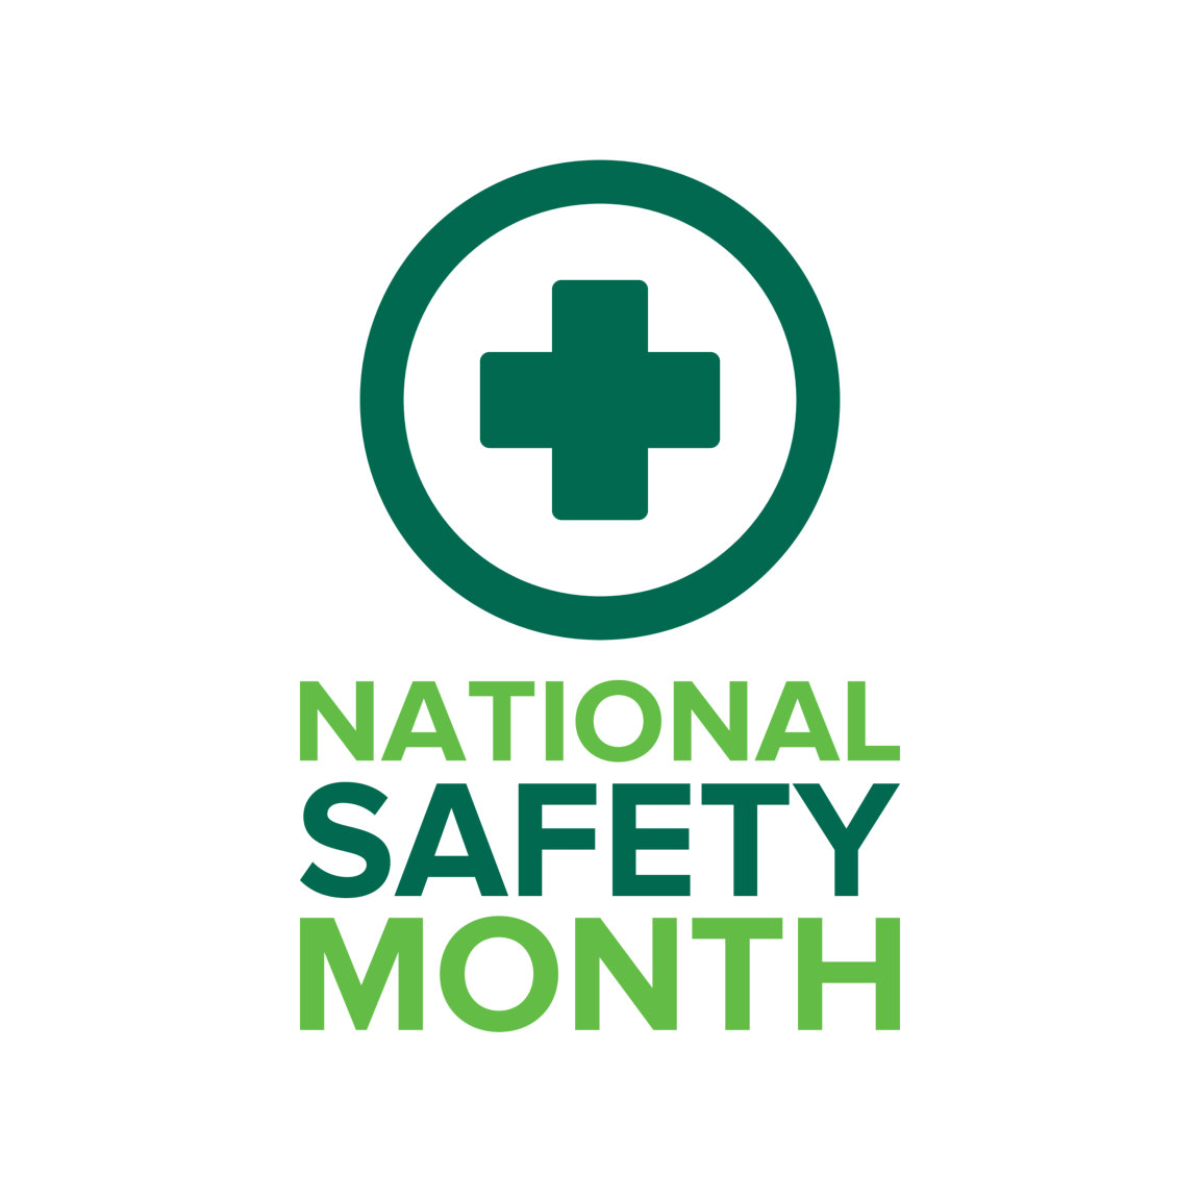 Safety Month

Safety is not only about avoiding accidents. It's also about taking care of our mental and emotional health. This Safety Month, let's make self-care and mental health a priority!

#HealthcareStaffing #HealthcareConsulting #SafetyMonth #SelfCare #ColumbusGA